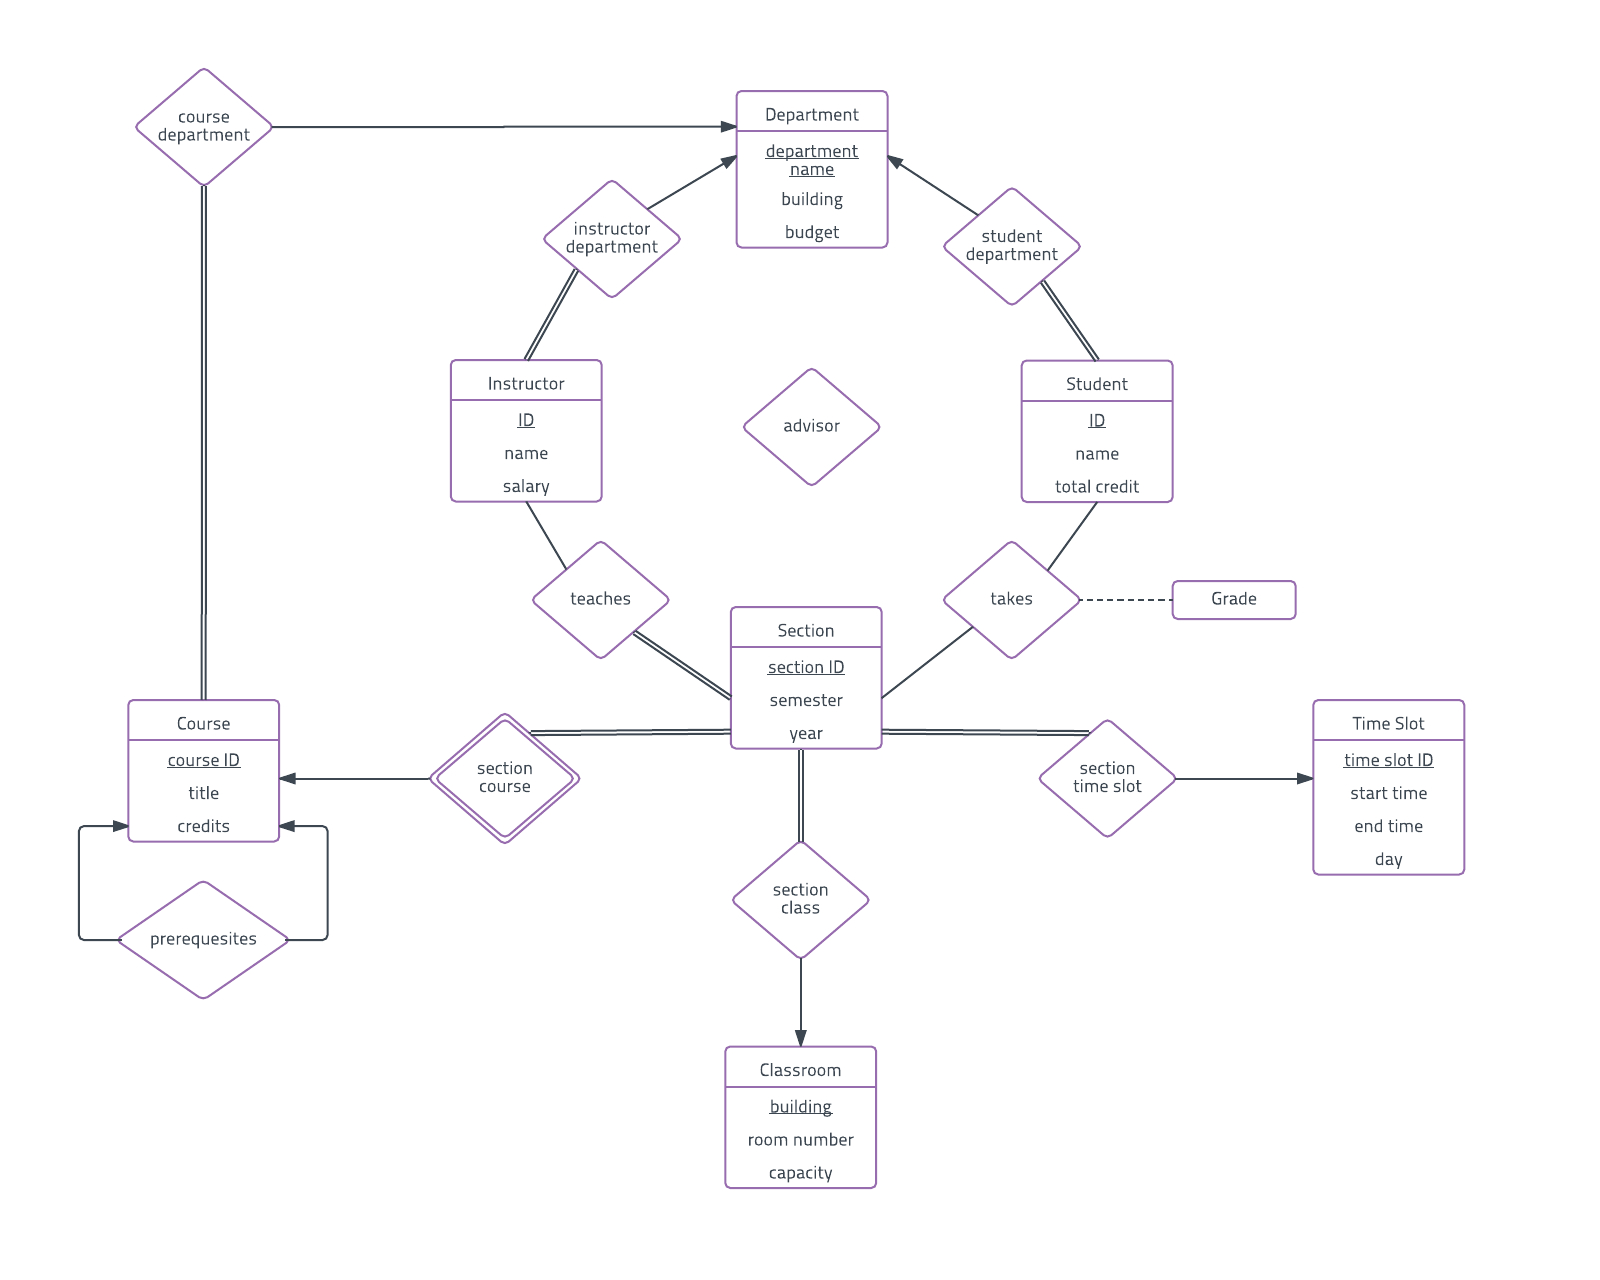 Er Diagram Examples And Templates | Lucidchart throughout Er Diagram For Hospital